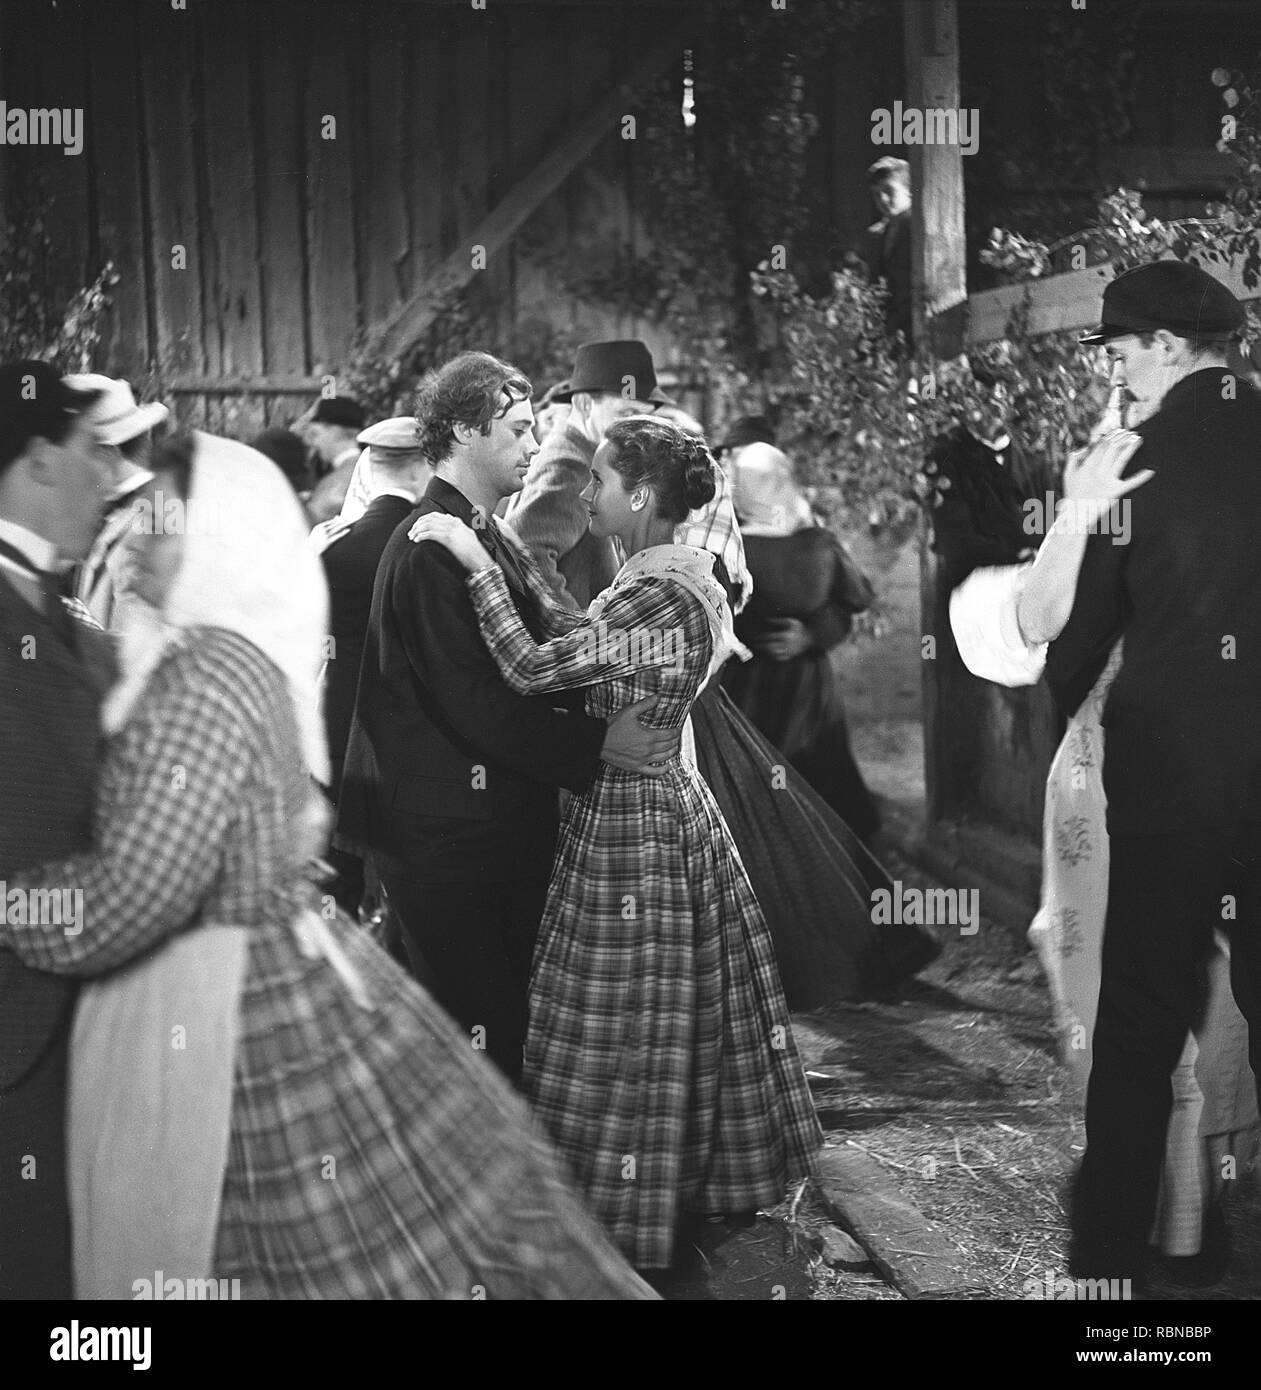 Dance event. People dancing at a rural dance held in a barn house. A historical re-enact during a filming of the swedish movie Folket i Simlångsdalen 1947. Sweden 1958. Ref CV9-12 Stock Photo